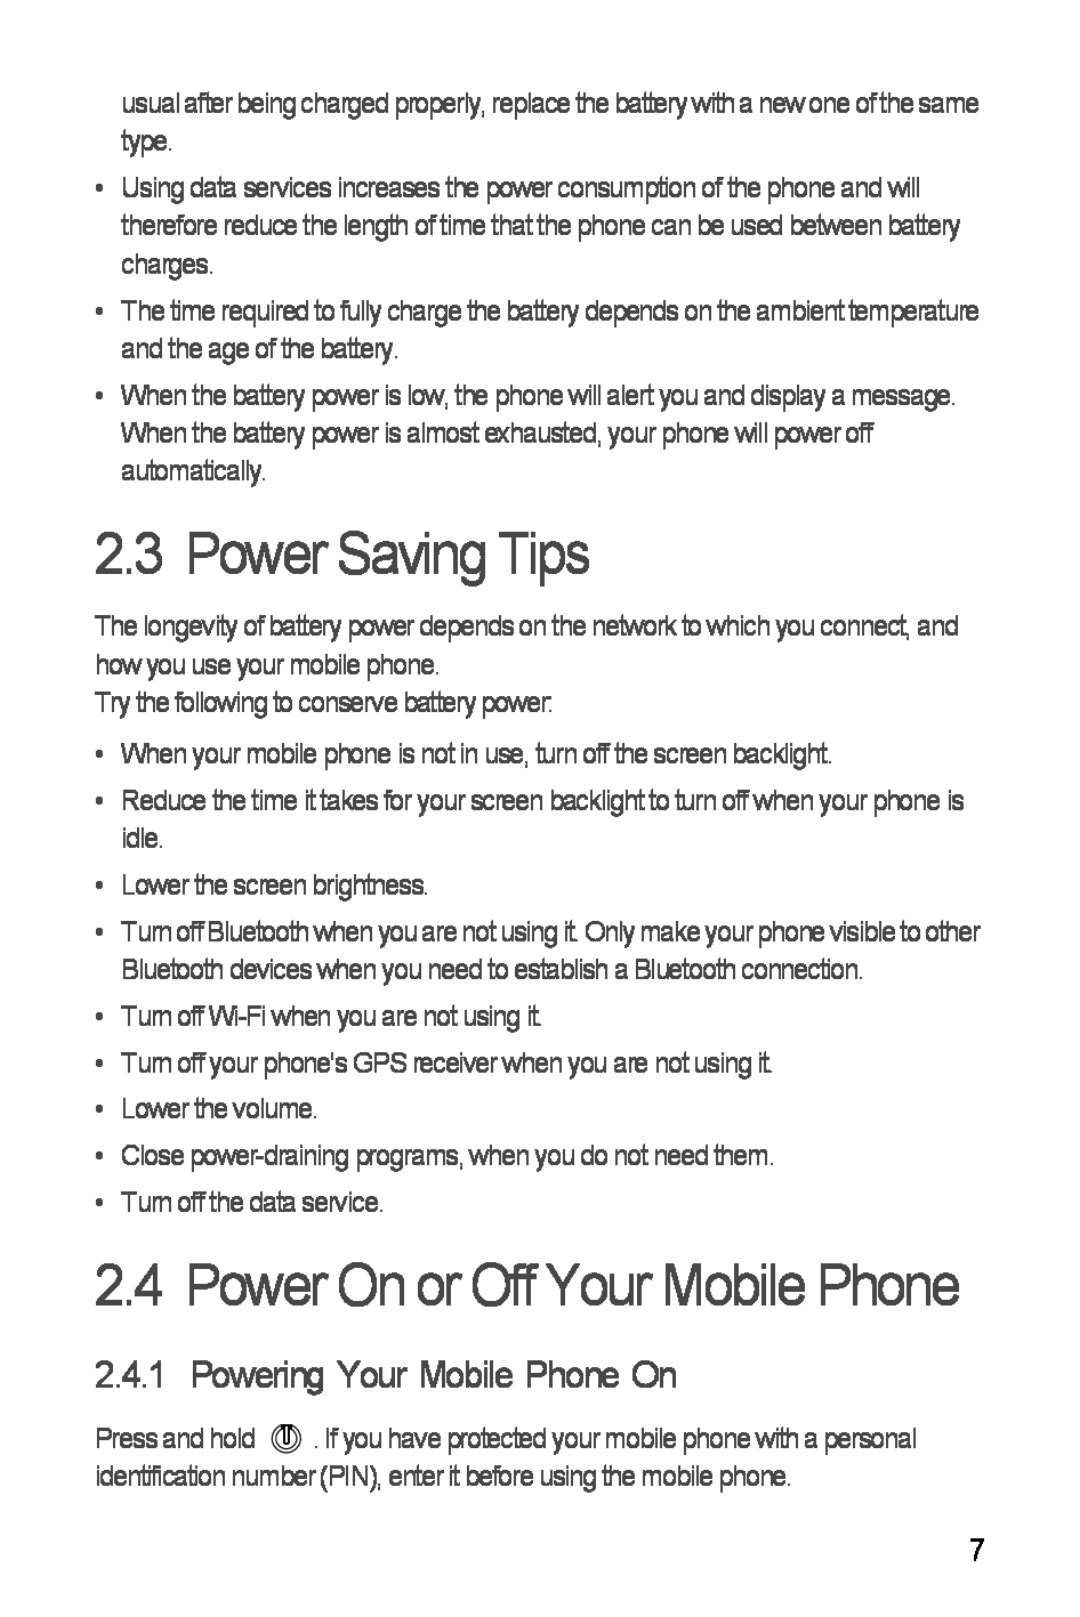 Huawei H881C manual Power Saving Tips, Power On or Off Your Mobile Phone, Powering Your Mobile Phone On 